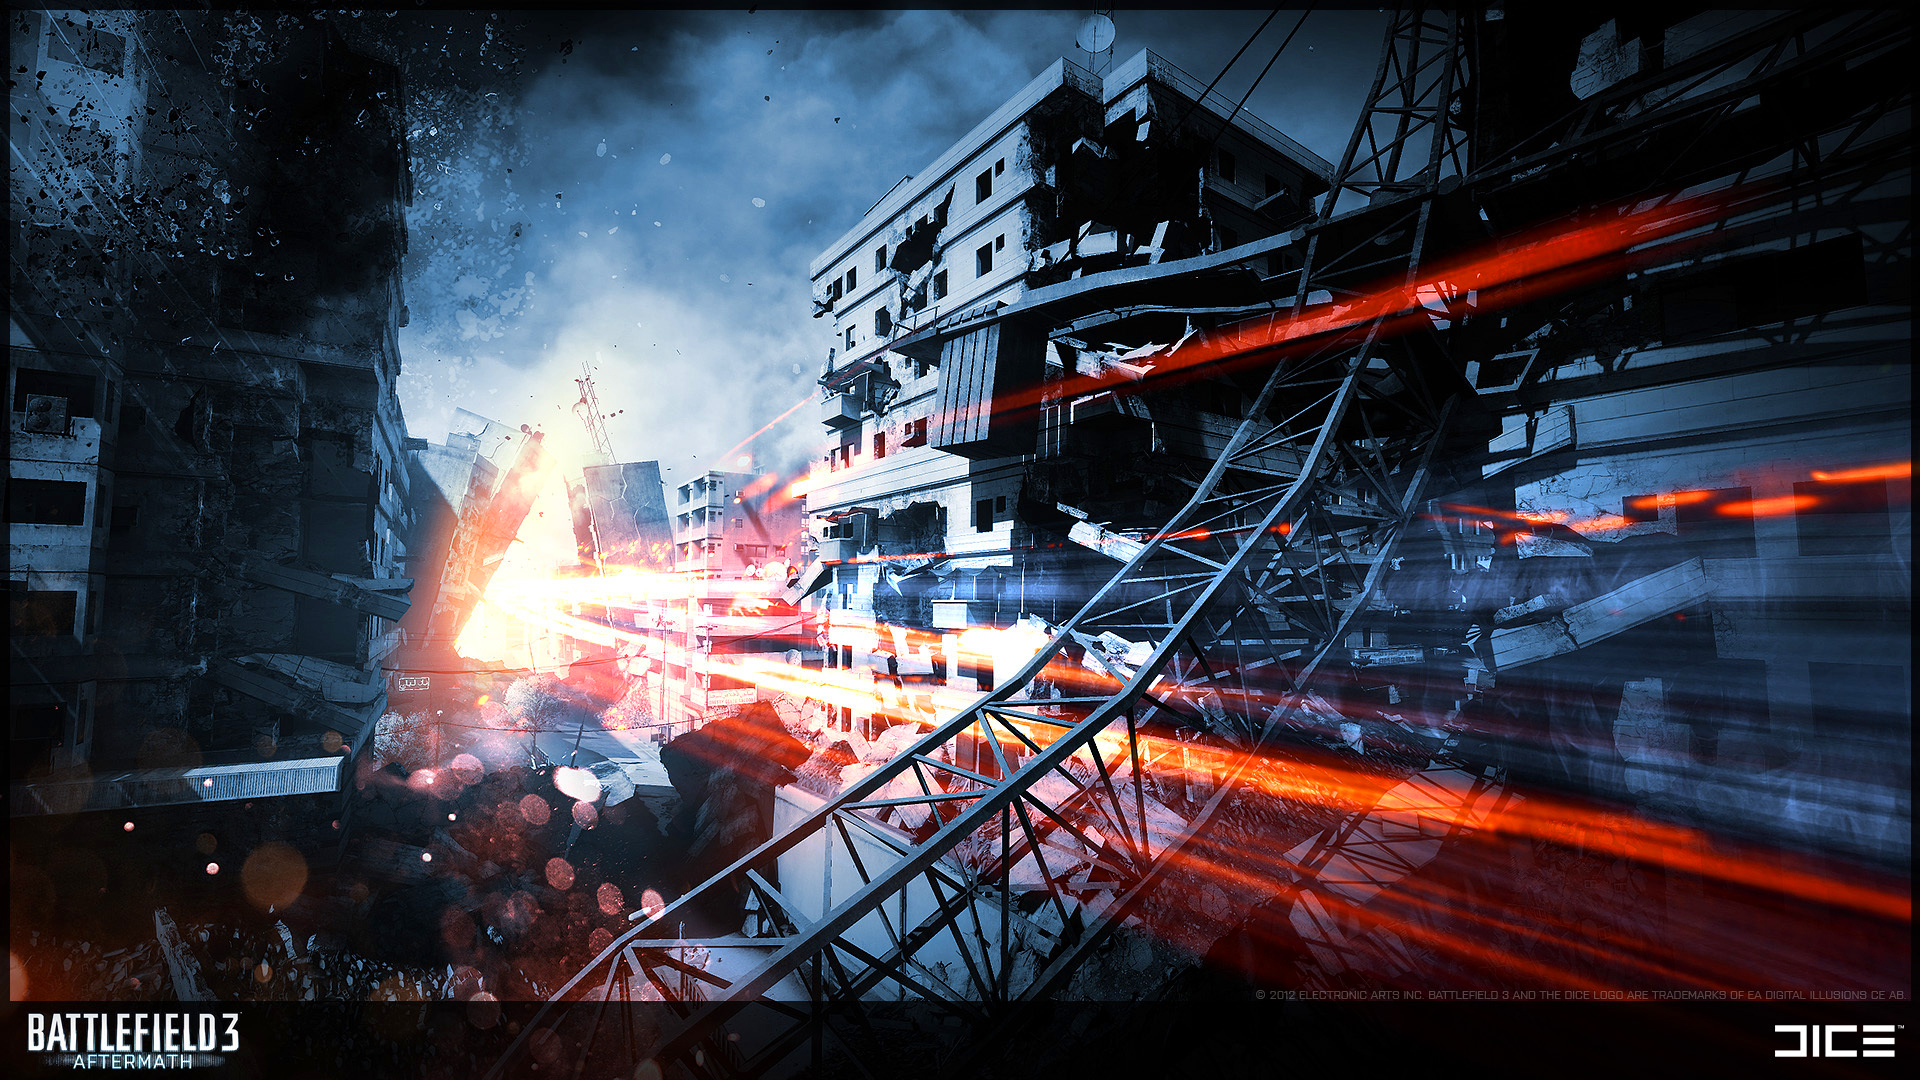 Battlefield 3 Aftermath Epicenter Wallpapers HD Wallpapers 1920x1080